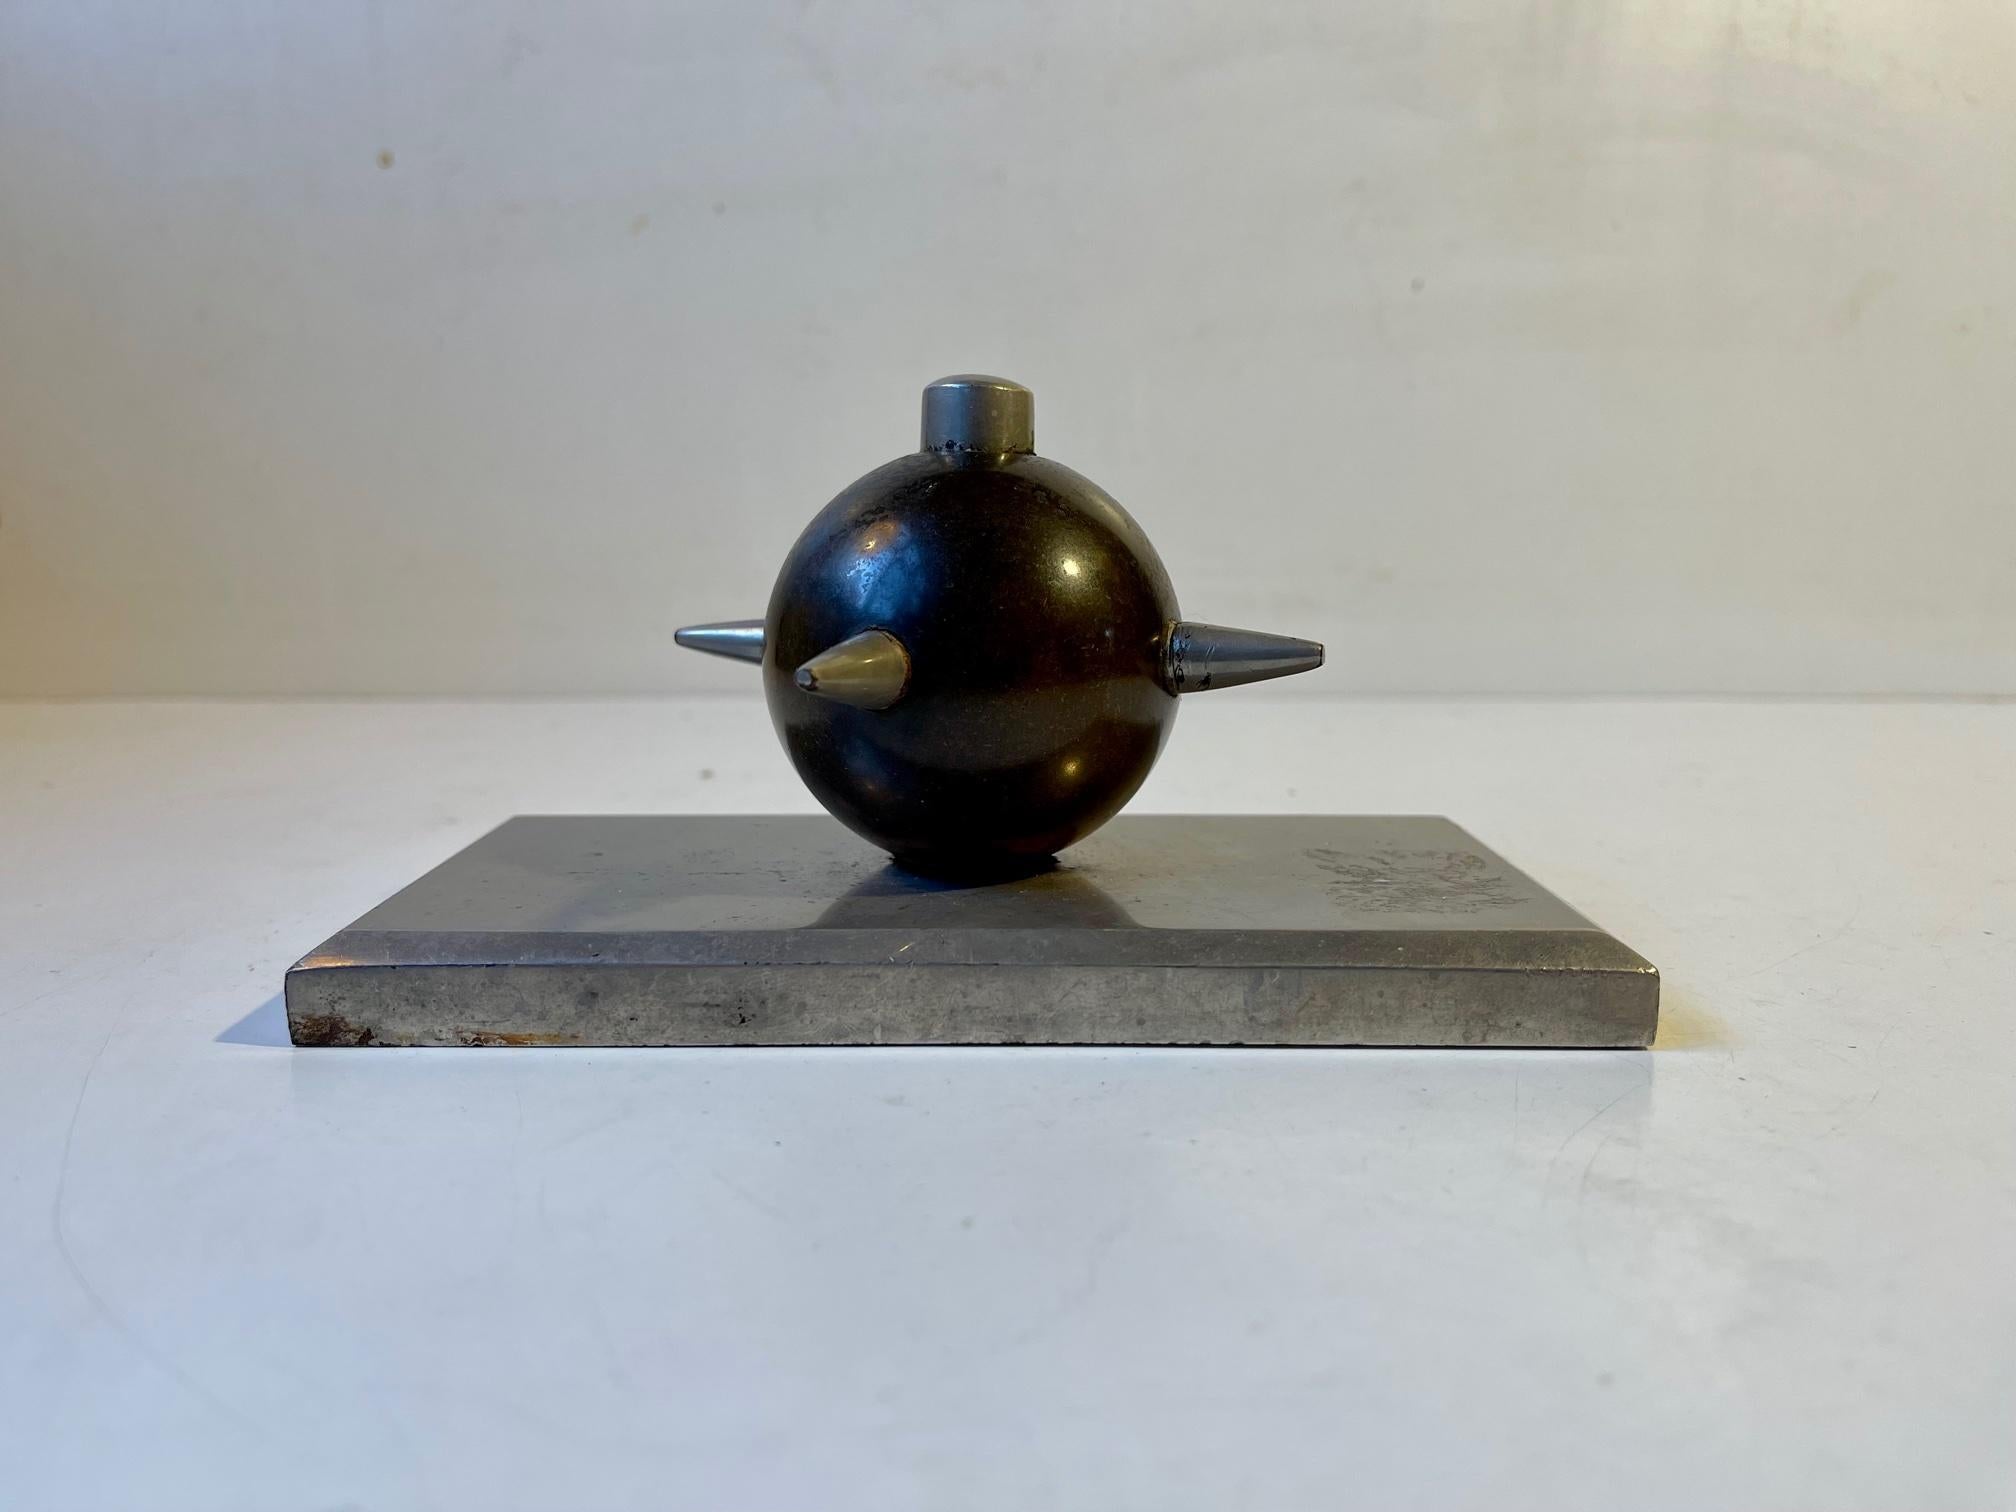 Weighing in over 2 kg this small unique desk sculpture was made anonymously in Denmark during the 1930s. Its thick stainless steel base supports a 18th or 19th century bronze cannon ball made into a mornings star head/ornament. Measurements: 15.5 x